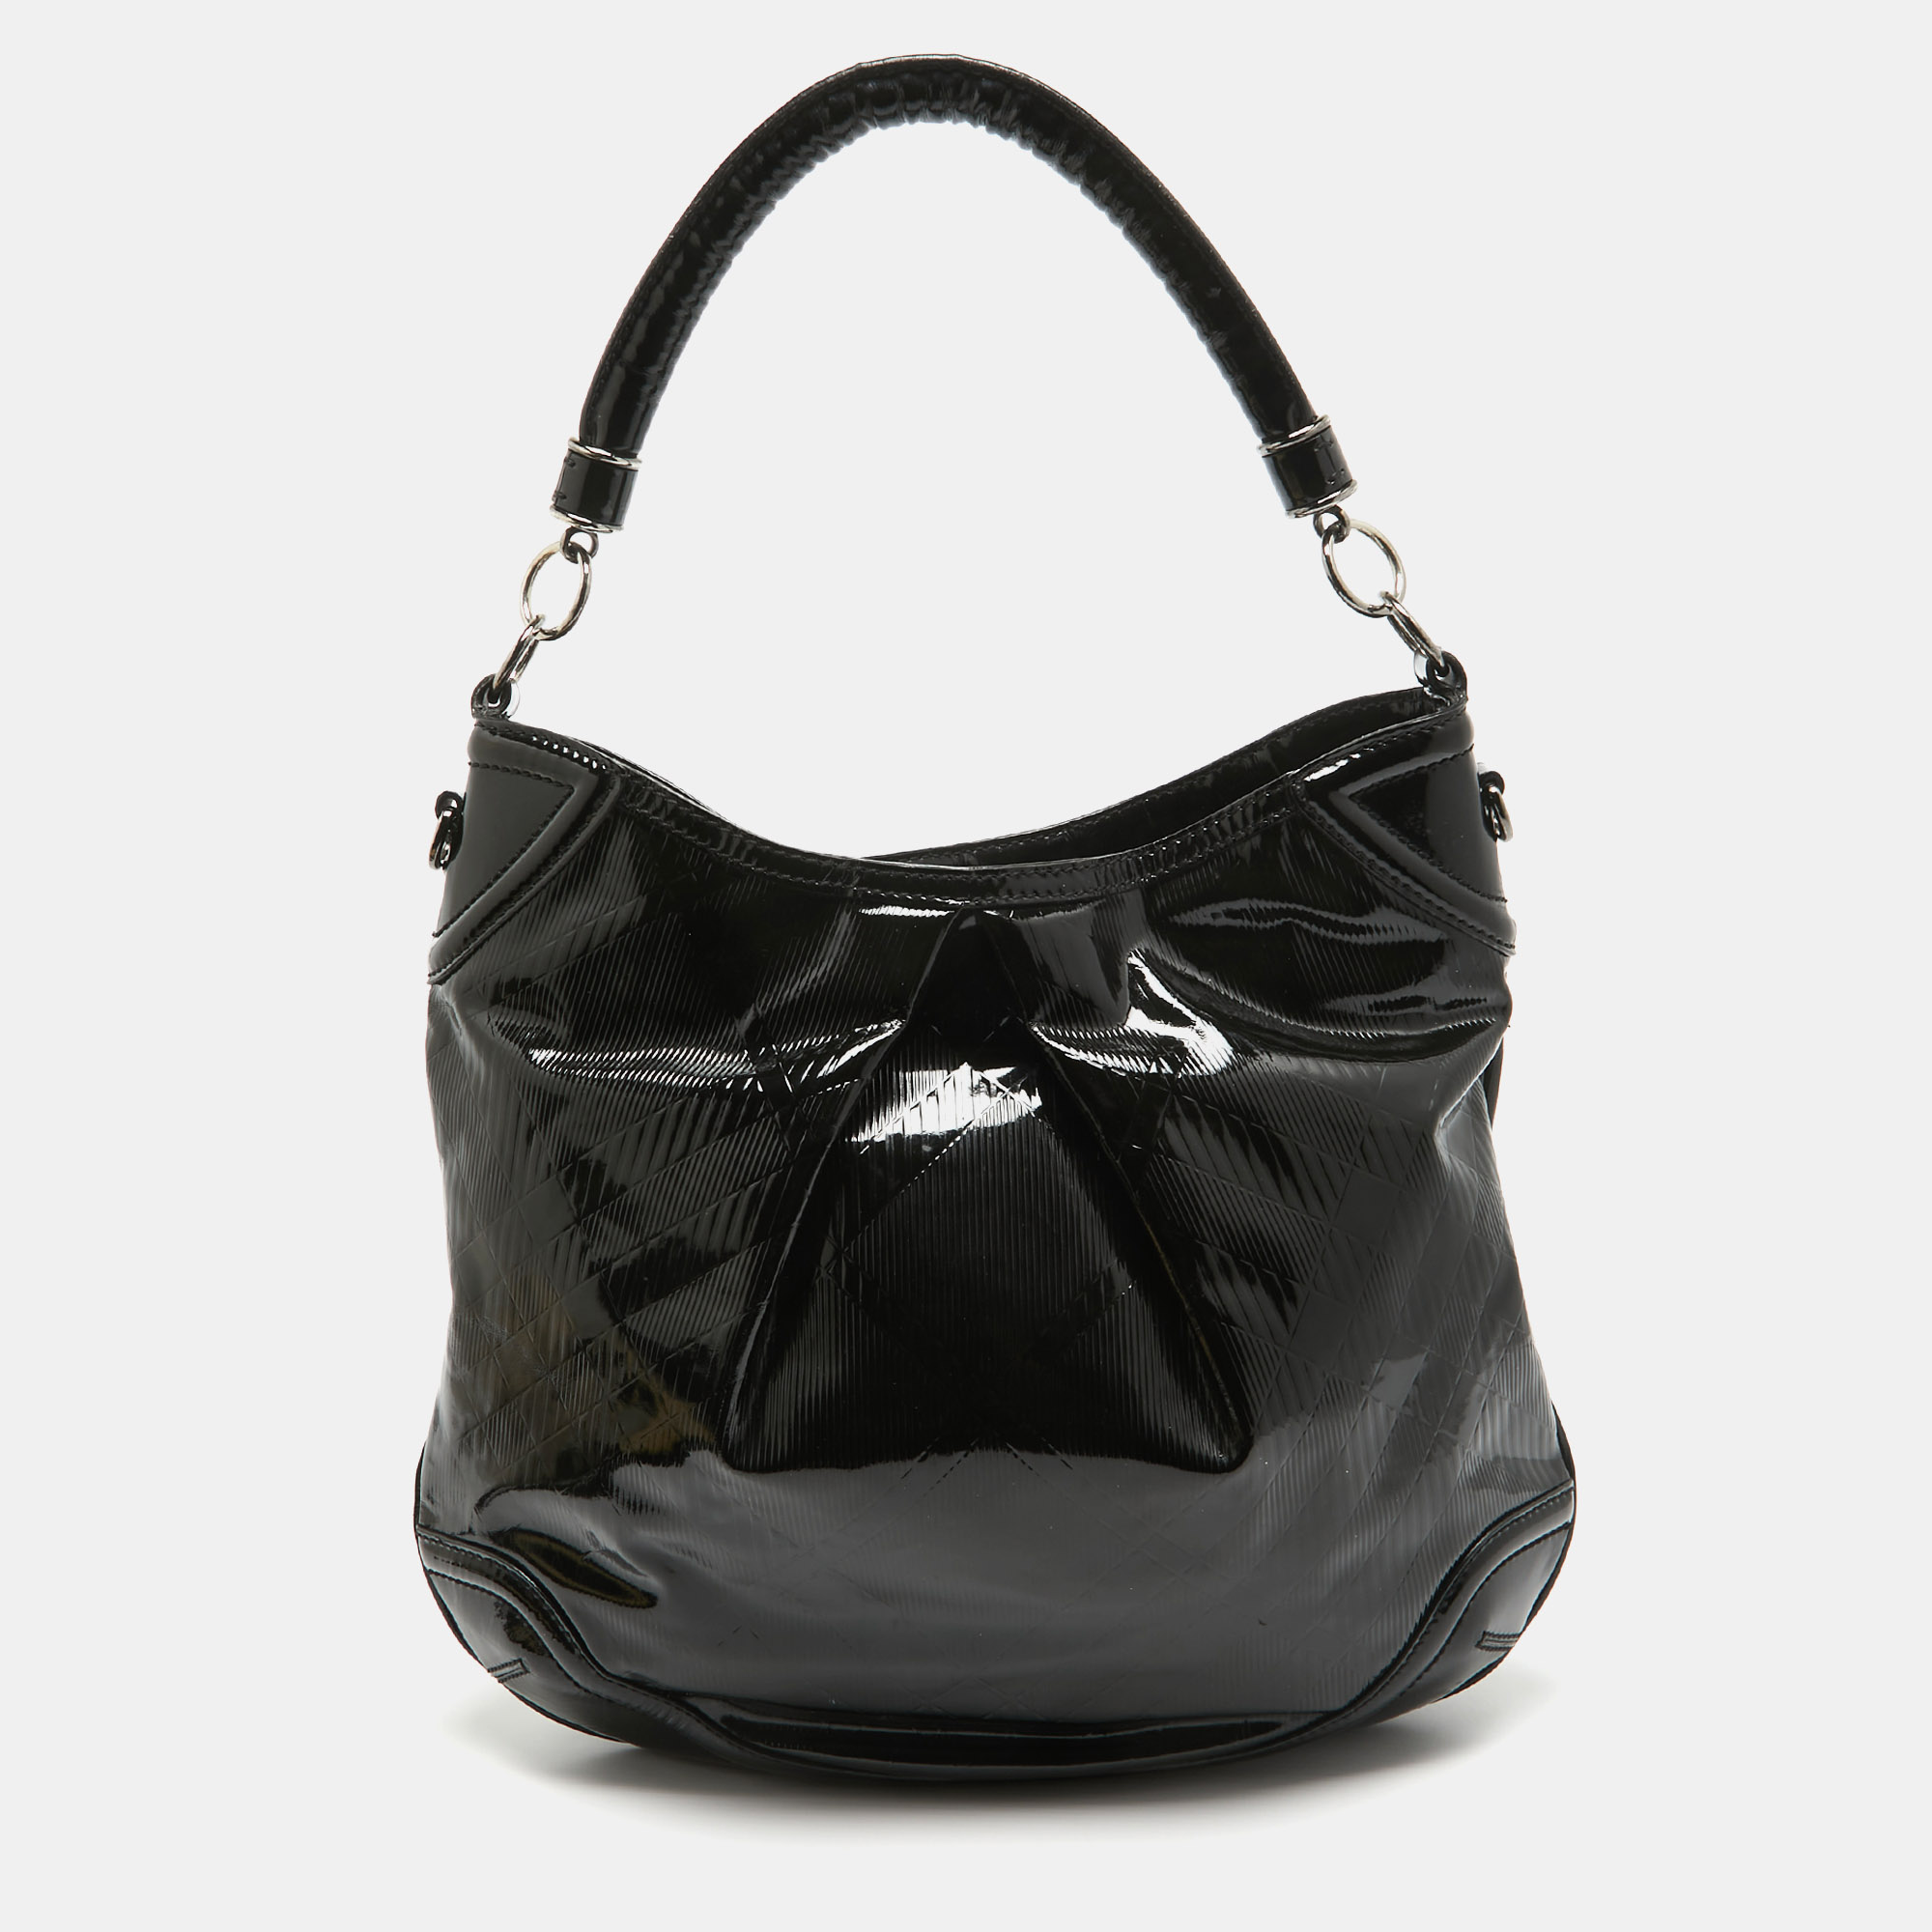 Pre-owned Burberry Black Textured Patent Leather Hobo